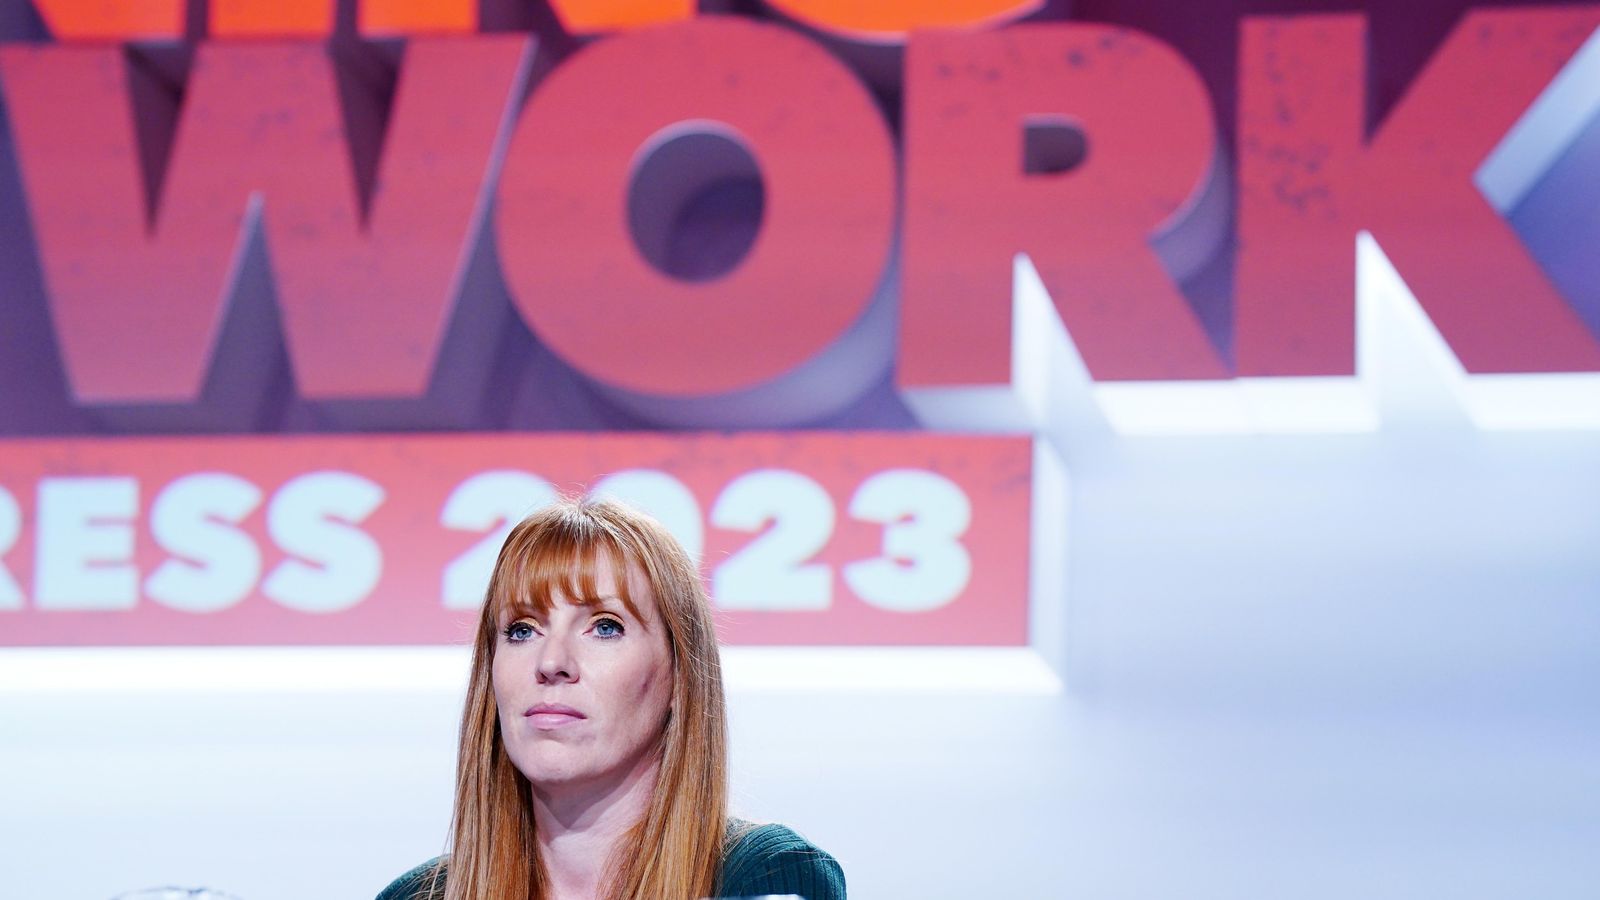 Labour's Angela Rayner makes 'cast iron commitment' on workers' rights to start general election 'battle'